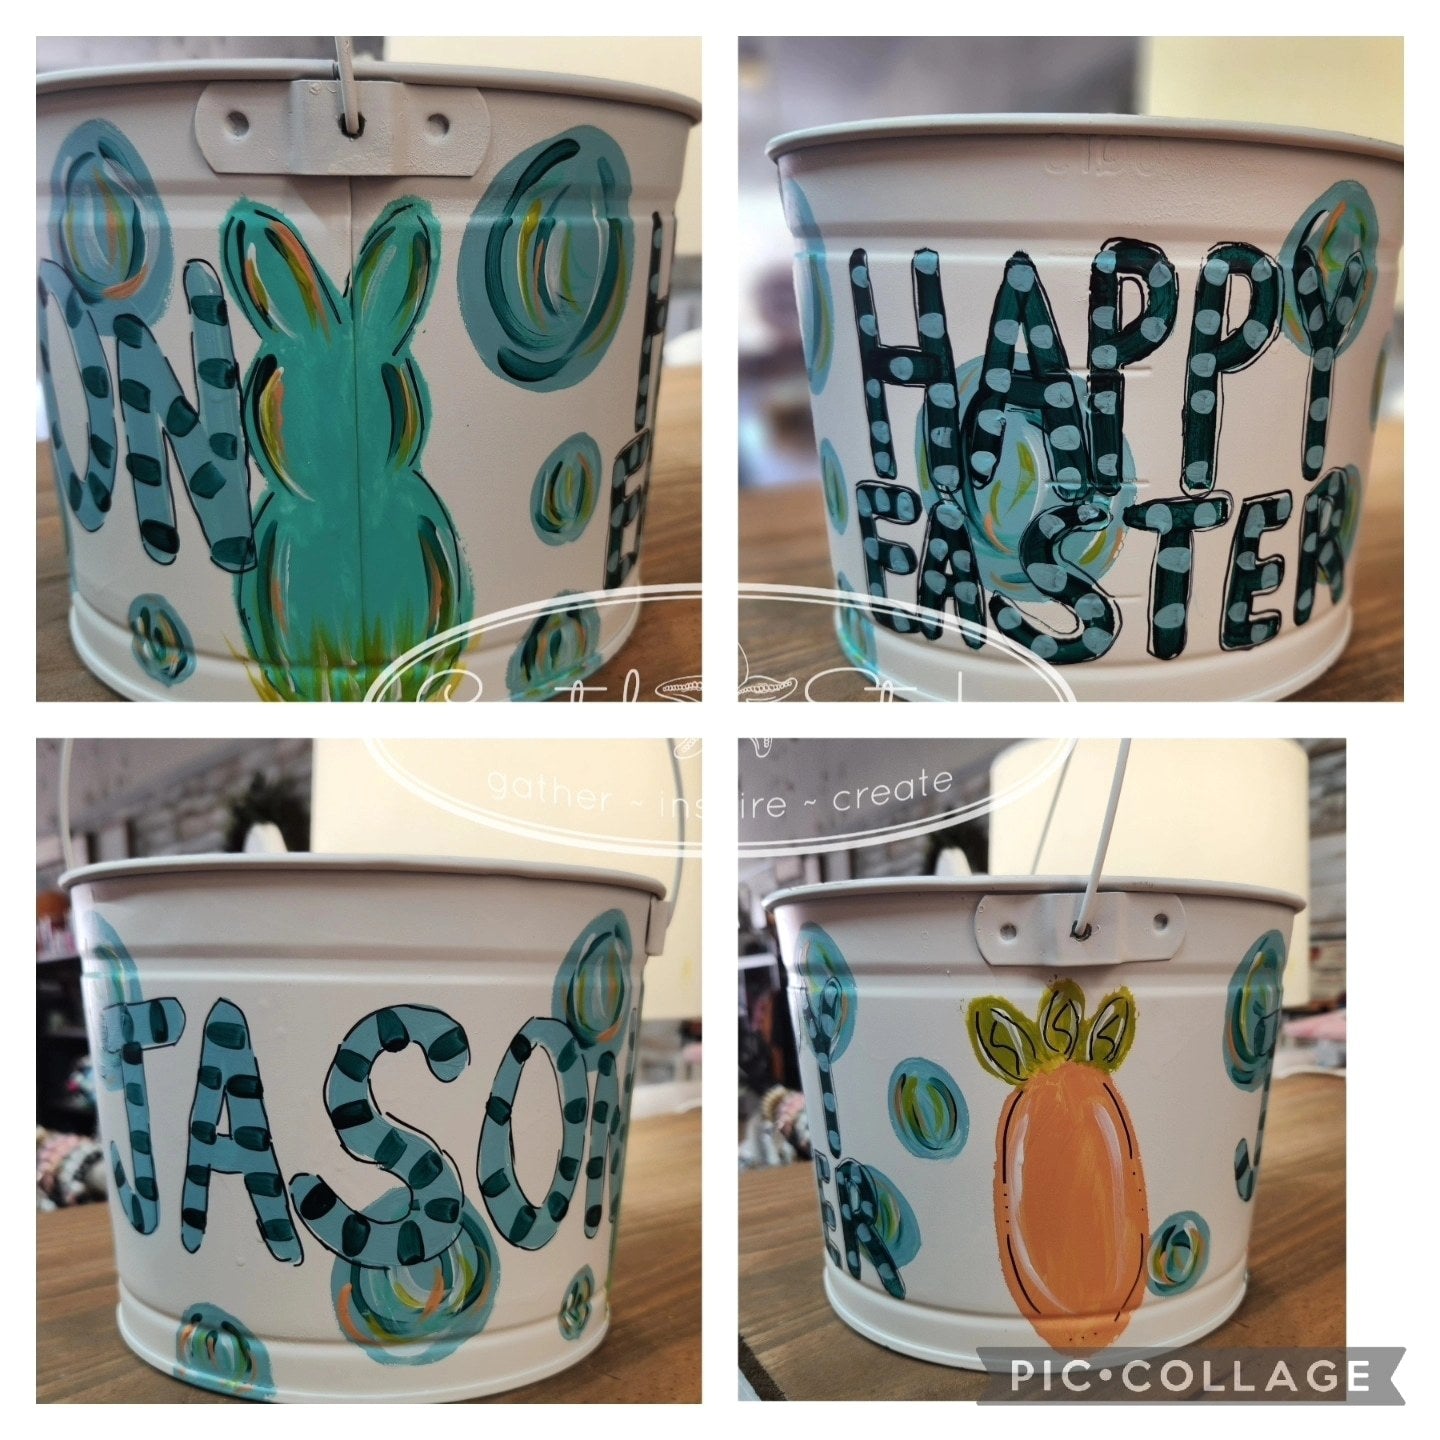 Personalized Easter Bucket